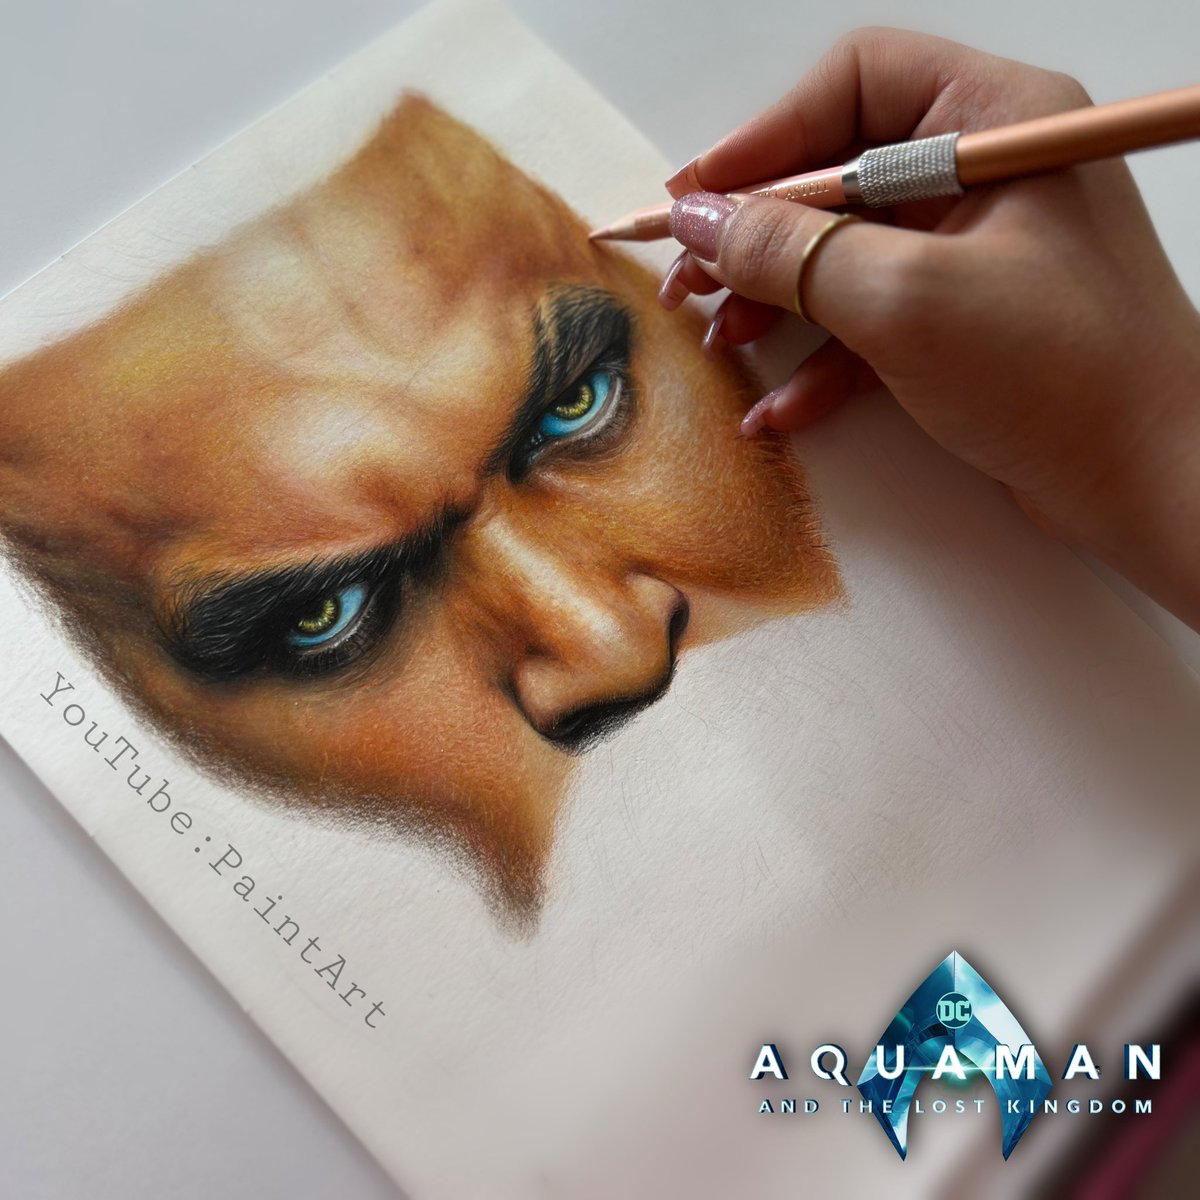 • Drawing #jasonmomoa ✍🏼 #Aquaman2 -With colored pencil 🎨 -Video drawing coming soon 🎥🔥 • On my YouTube channel:youtube.com/@PaintArt_org #drawing #art #Aquaman #AquamanAndTheLostKingdom @aquamanmovie